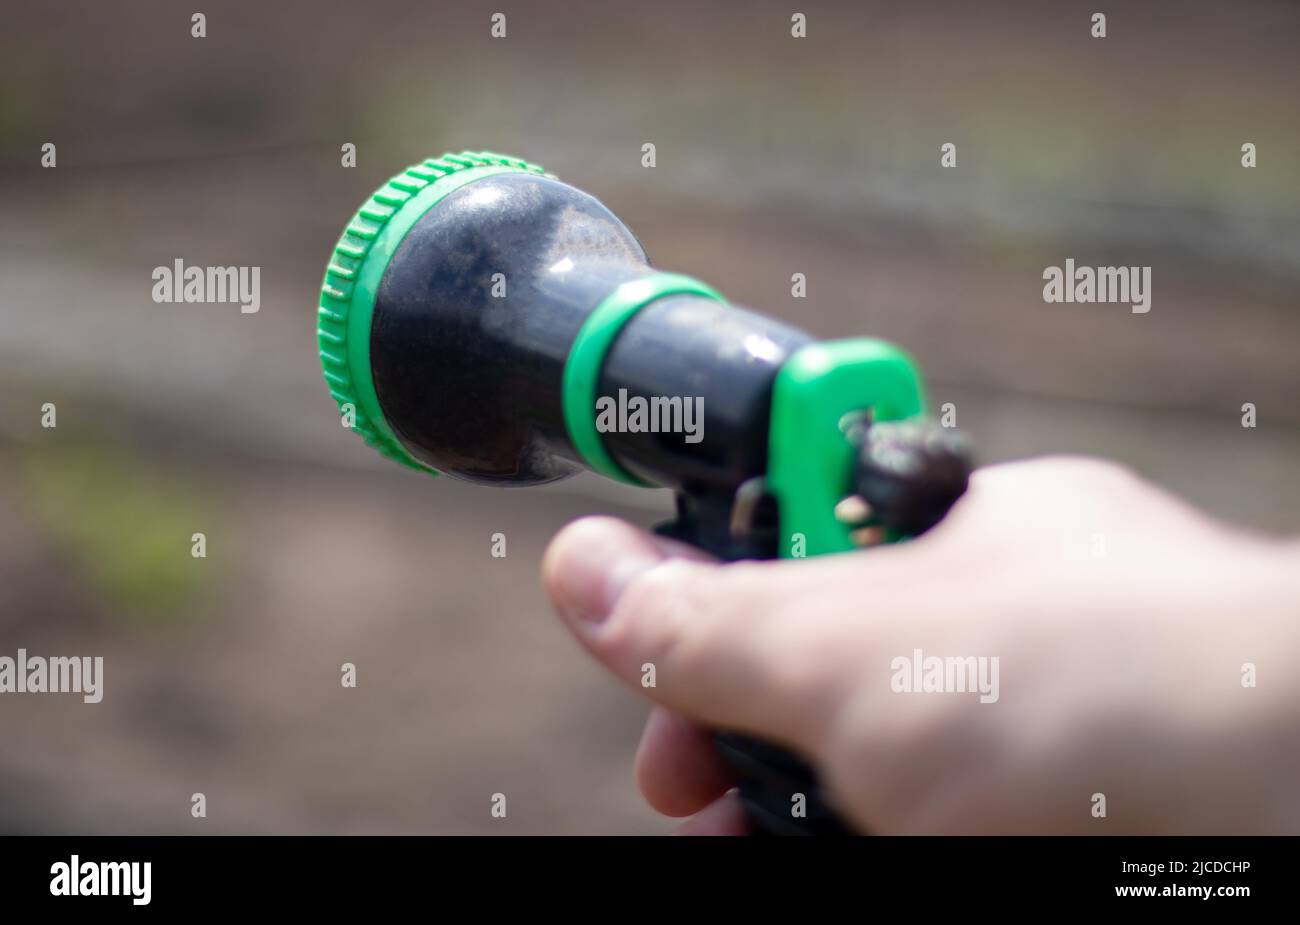 The gardener's hand holds a hose with a sprayer and waters the plants in the garden. Green atomizer in hand with a large lan. Horticulture hobby conce Stock Photo